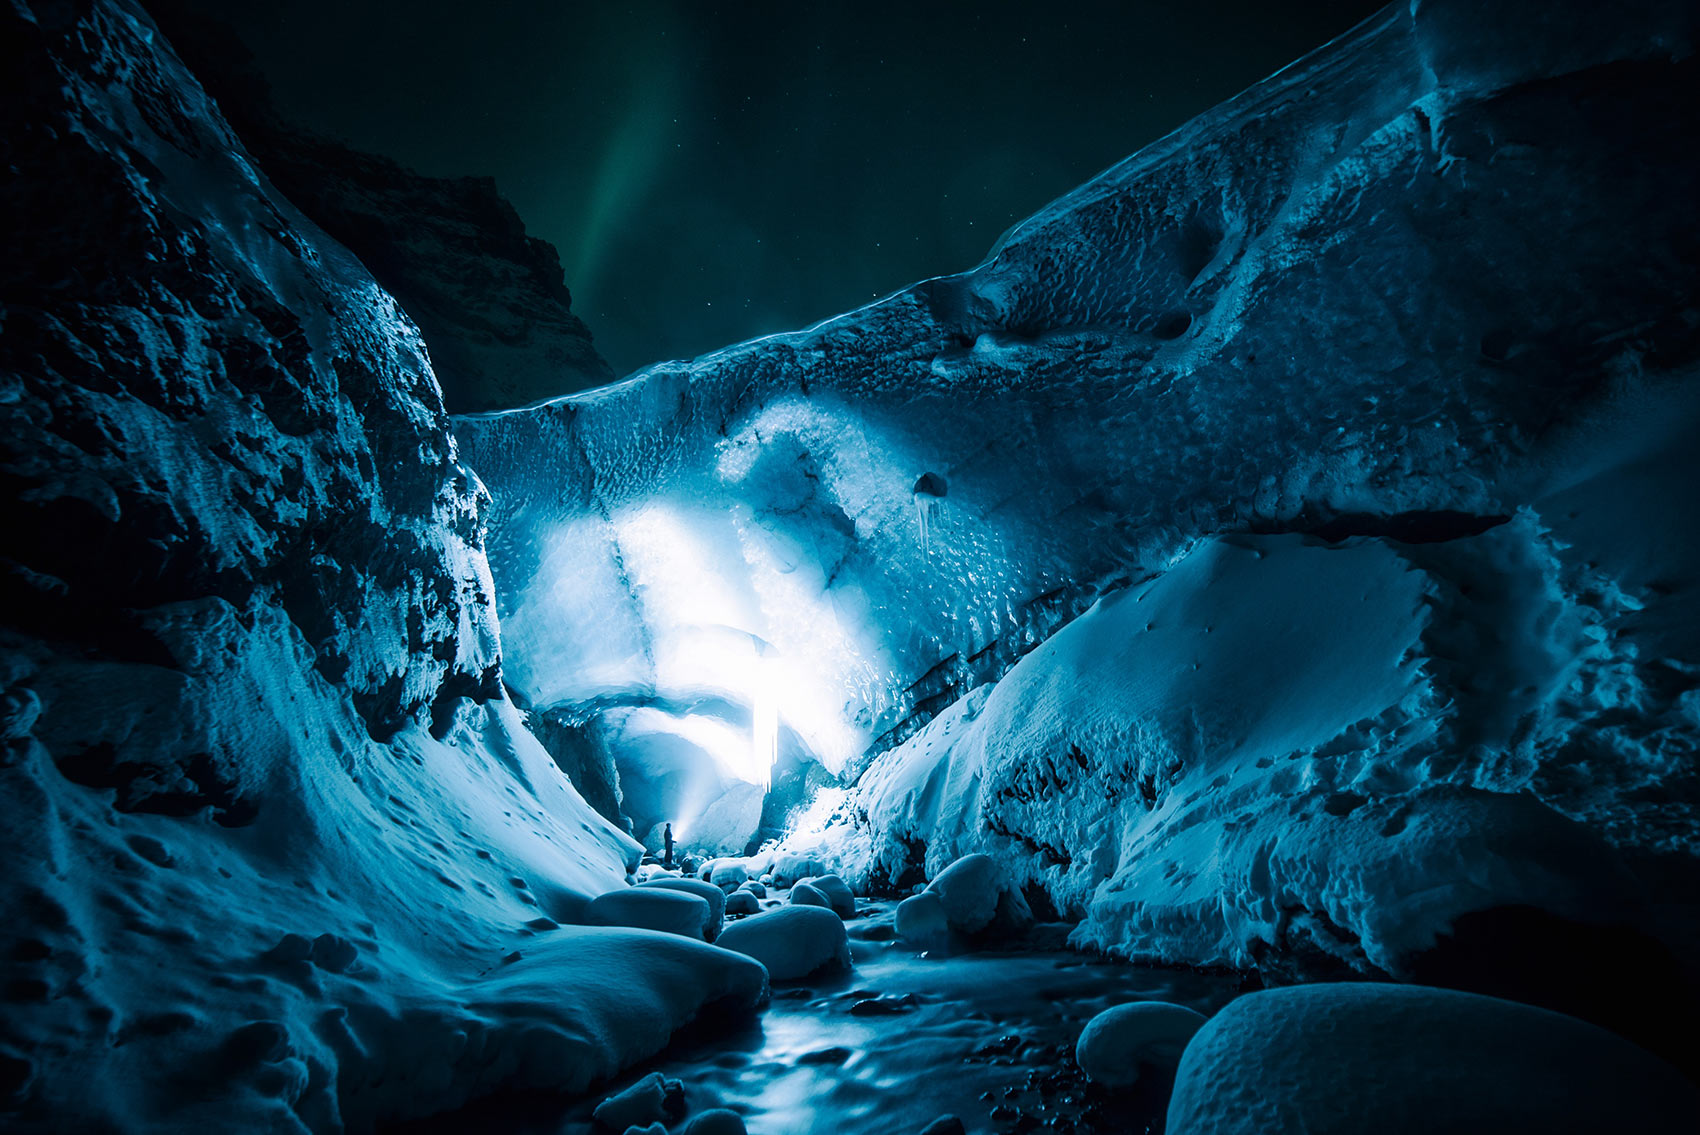 Exploring the great ice cavern